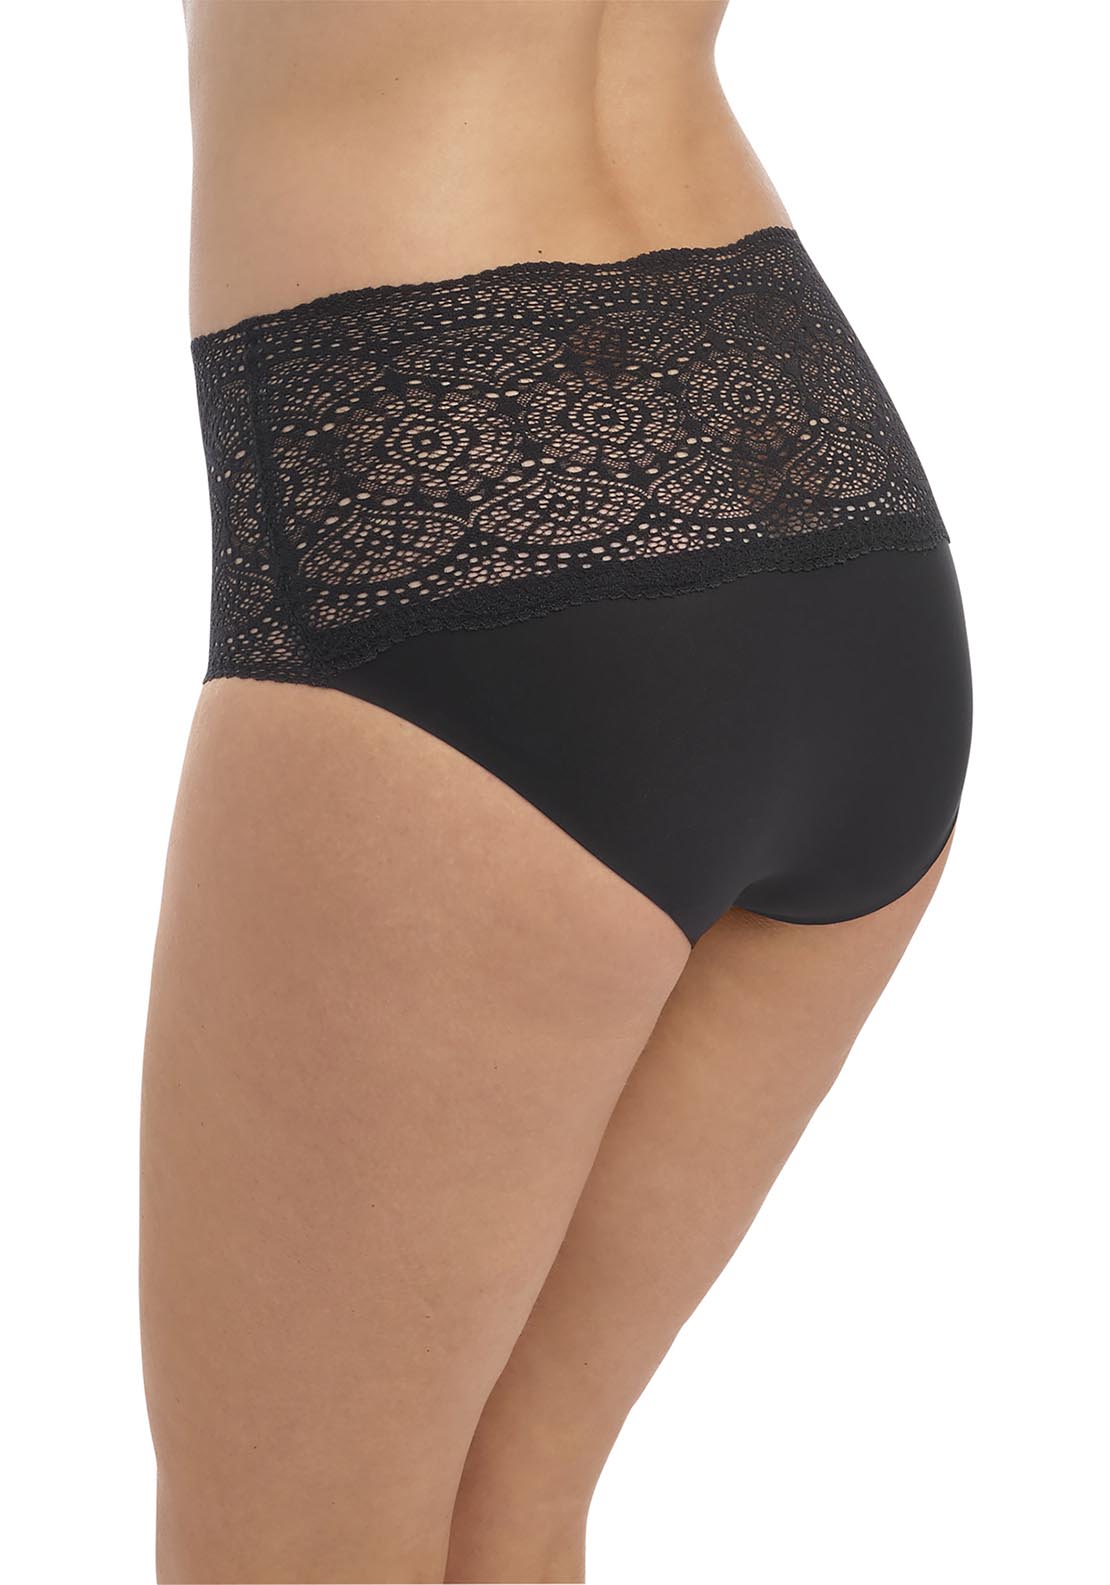 Fantasie Lace Ease Invisible Stretch Full Briefs - Black 3 Shaws Department Stores